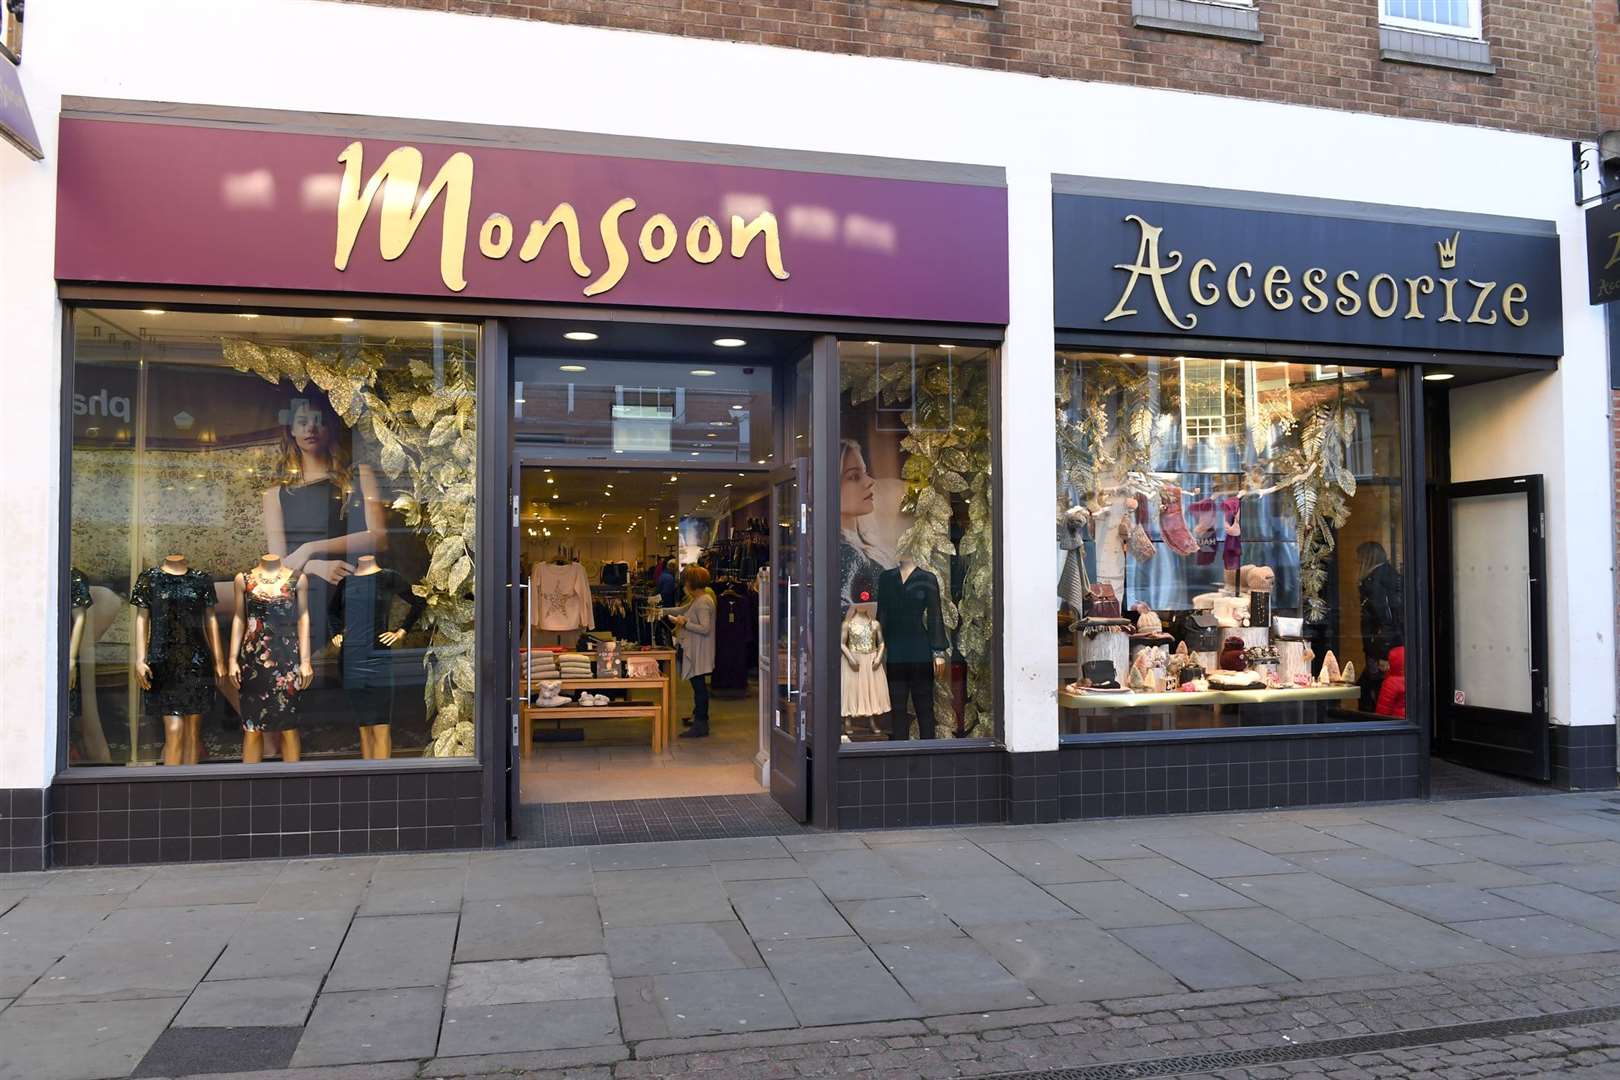 Monsoon Accessorize, the business behind popular High Street fashion retailers Monsoon and Accessorize have announced they are closing 35 stores across the UK with 2 in The Three Counties